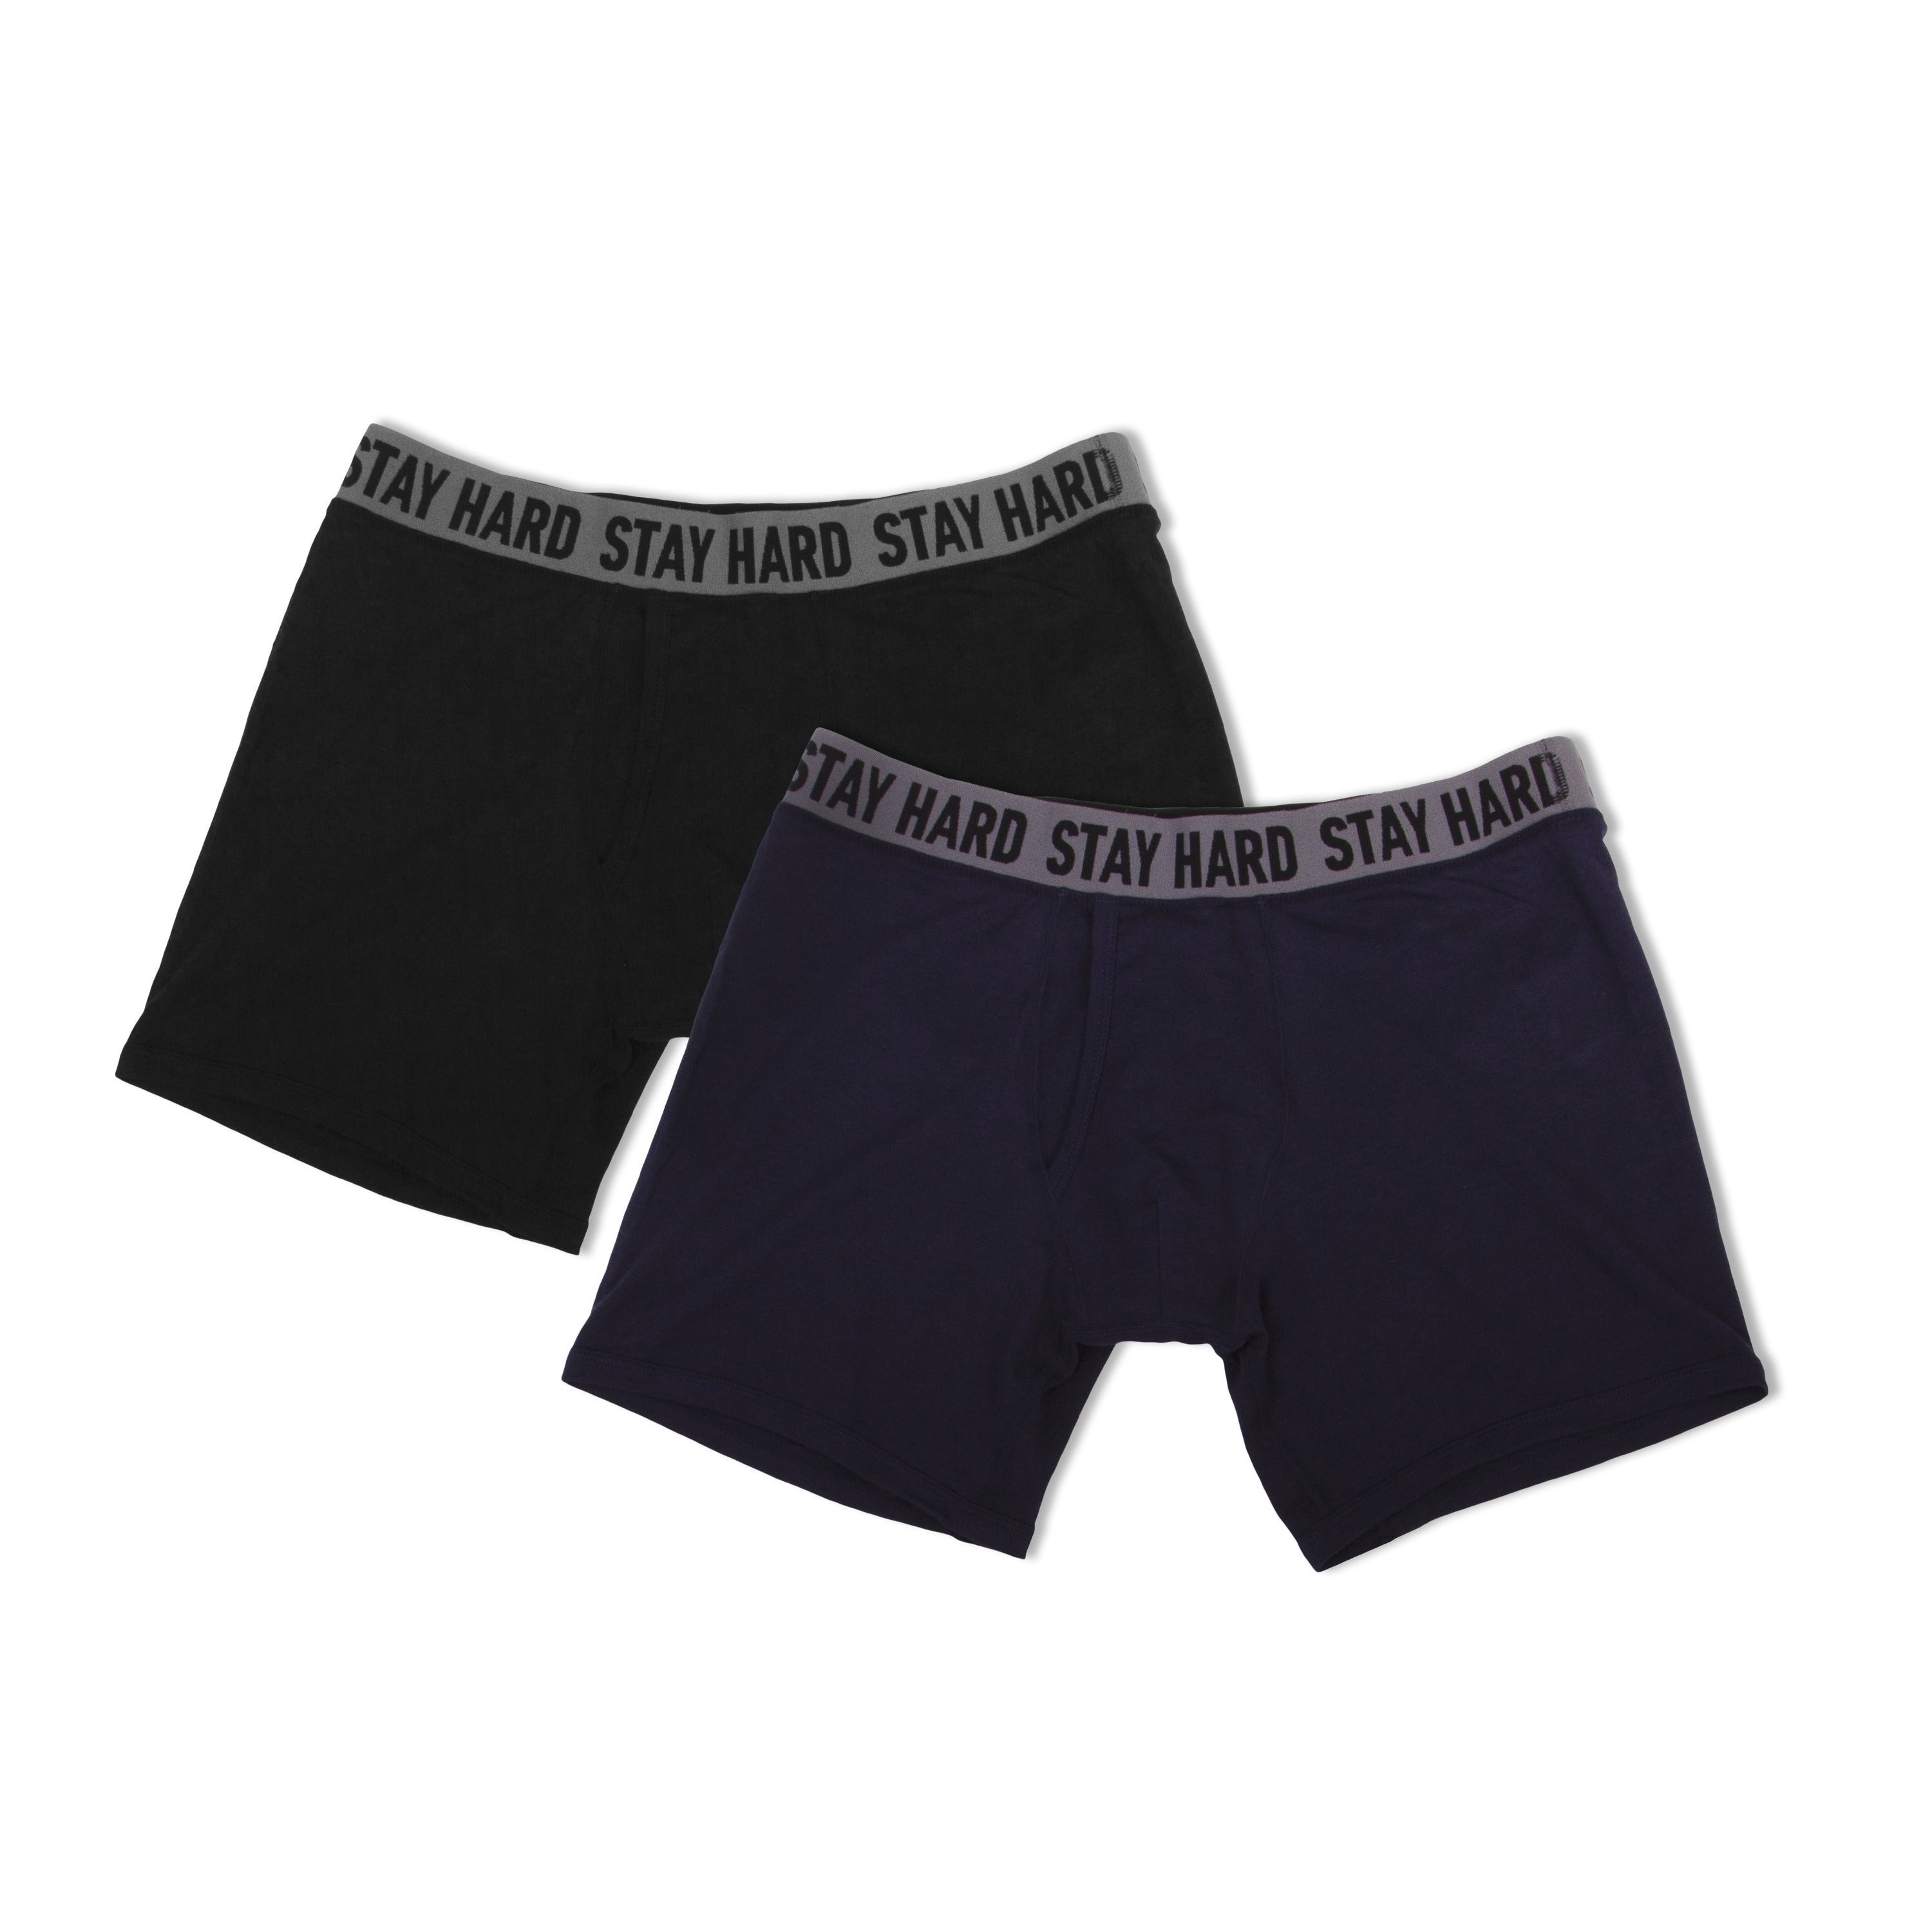 Stay Hard Boxer Briefs - 2 Pack